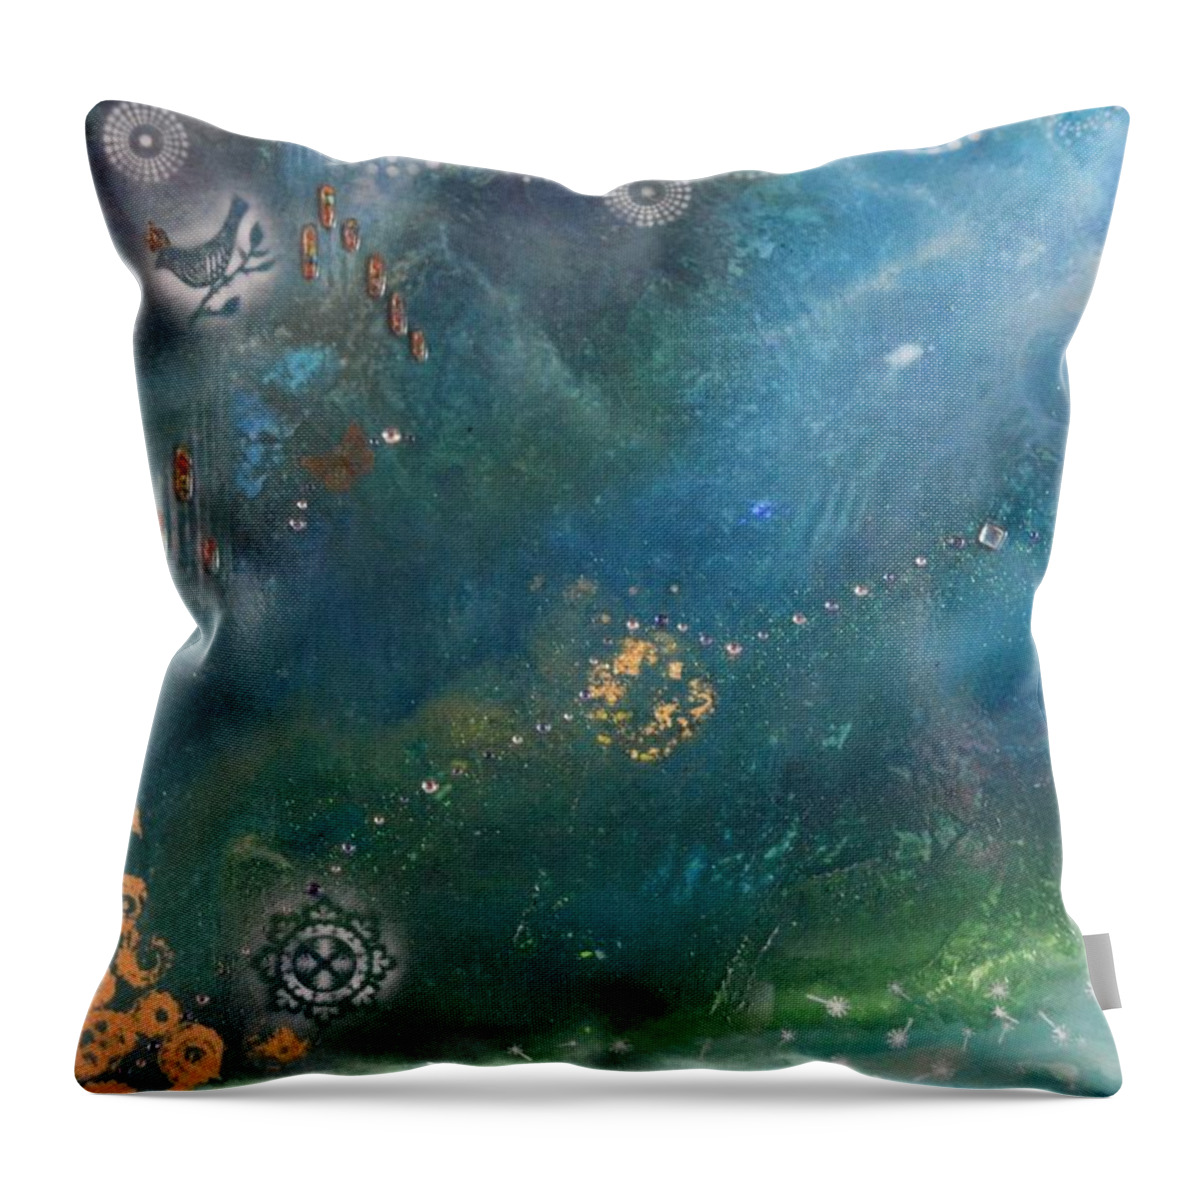 Dream Throw Pillow featuring the mixed media Dream by MiMi Stirn